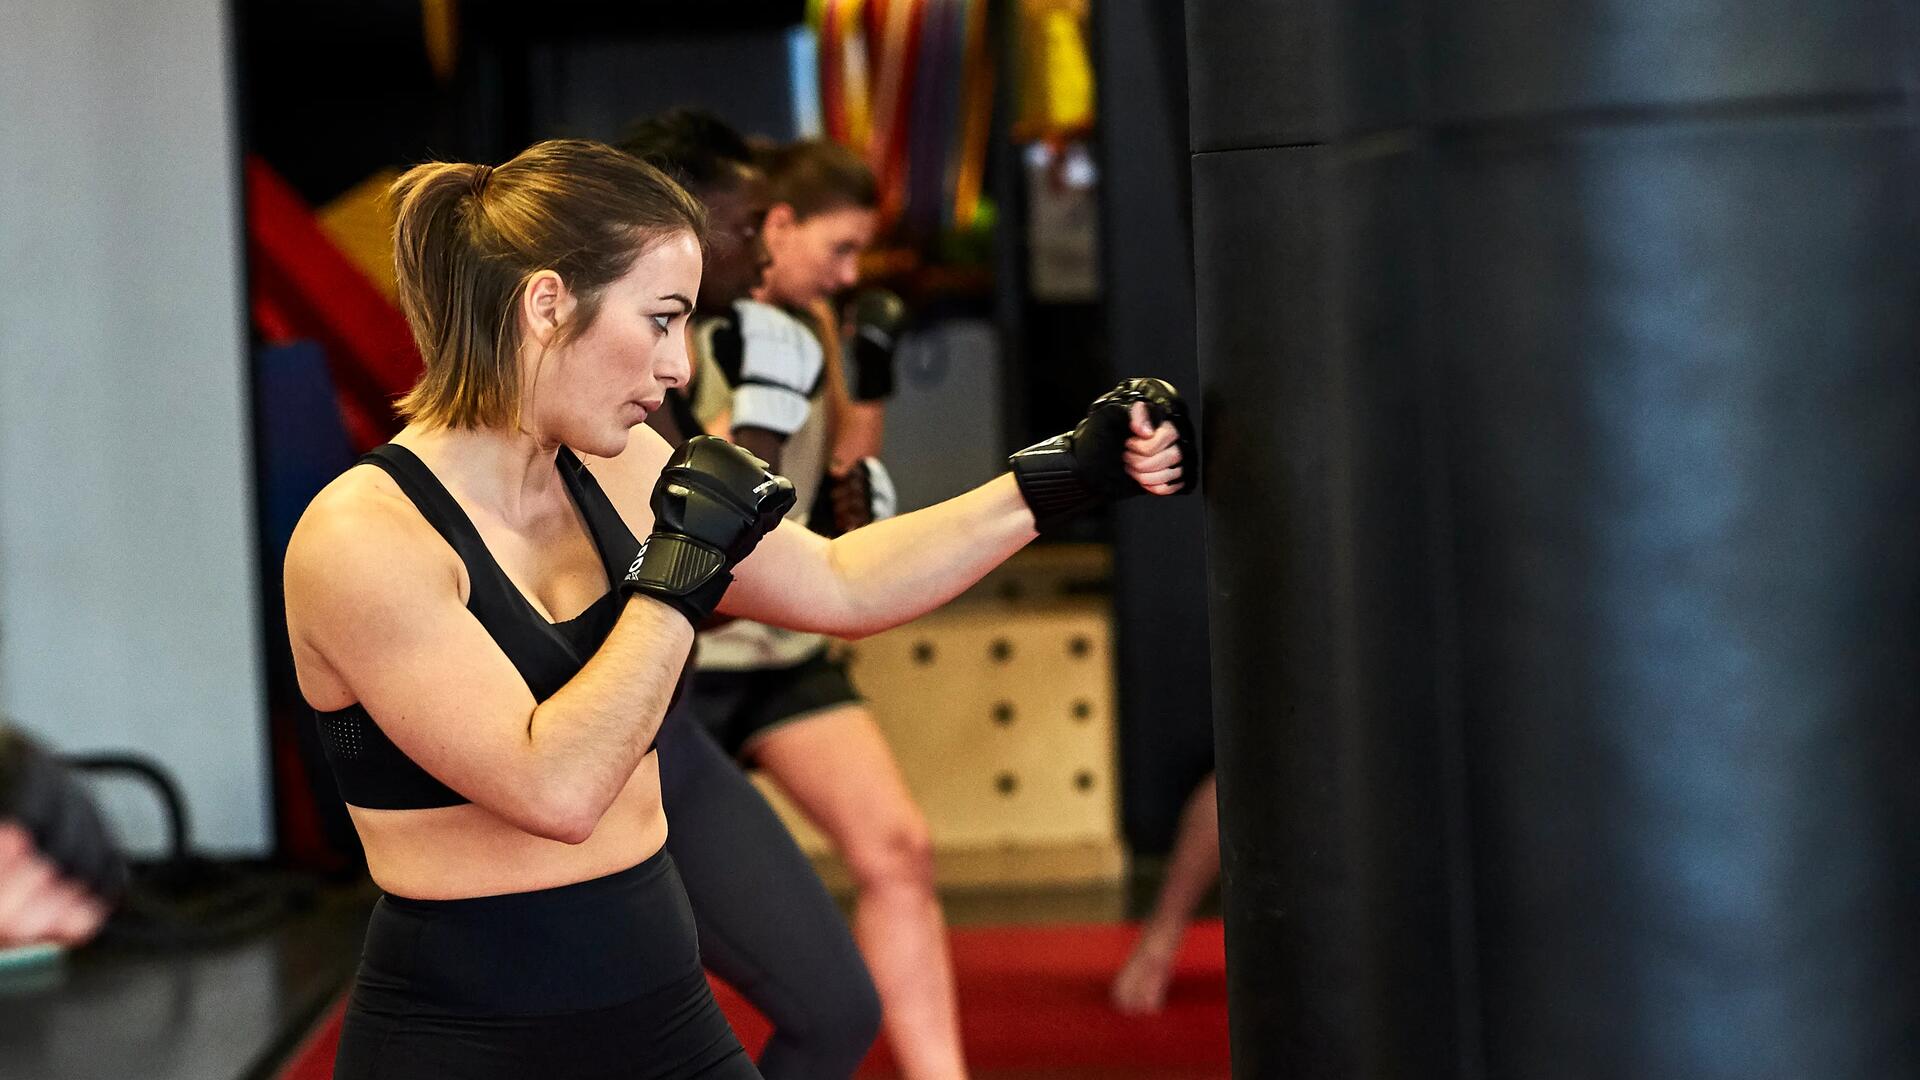 woman concentrated during a boxing class